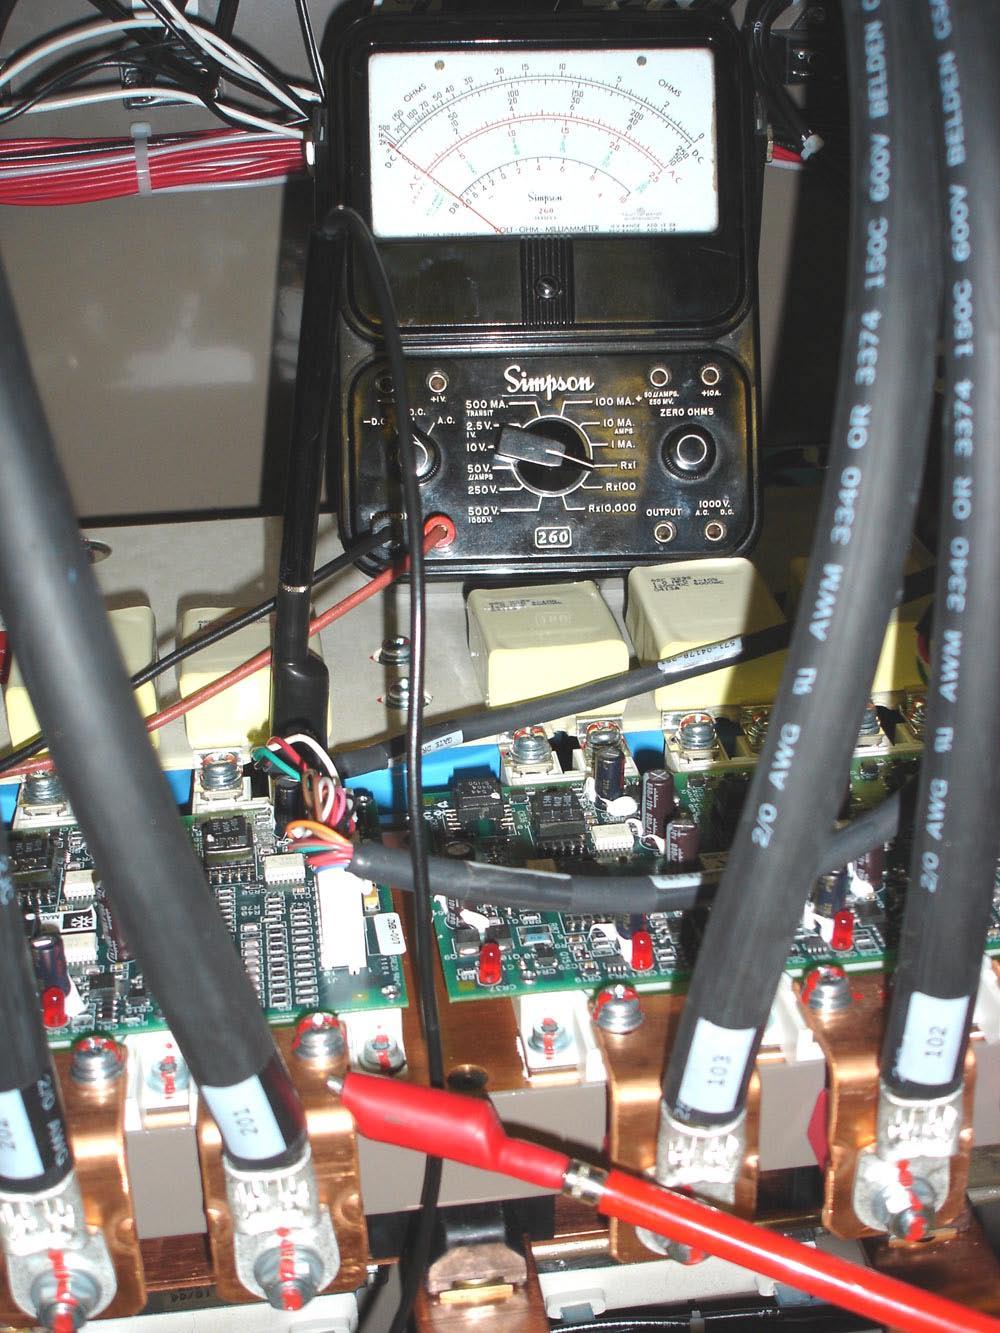 right hand terminal of the IGBT module. This is the positive bus connection. The analog meter reading will be near full scale to the left of the meter movement. The digital meter reading will be OL.